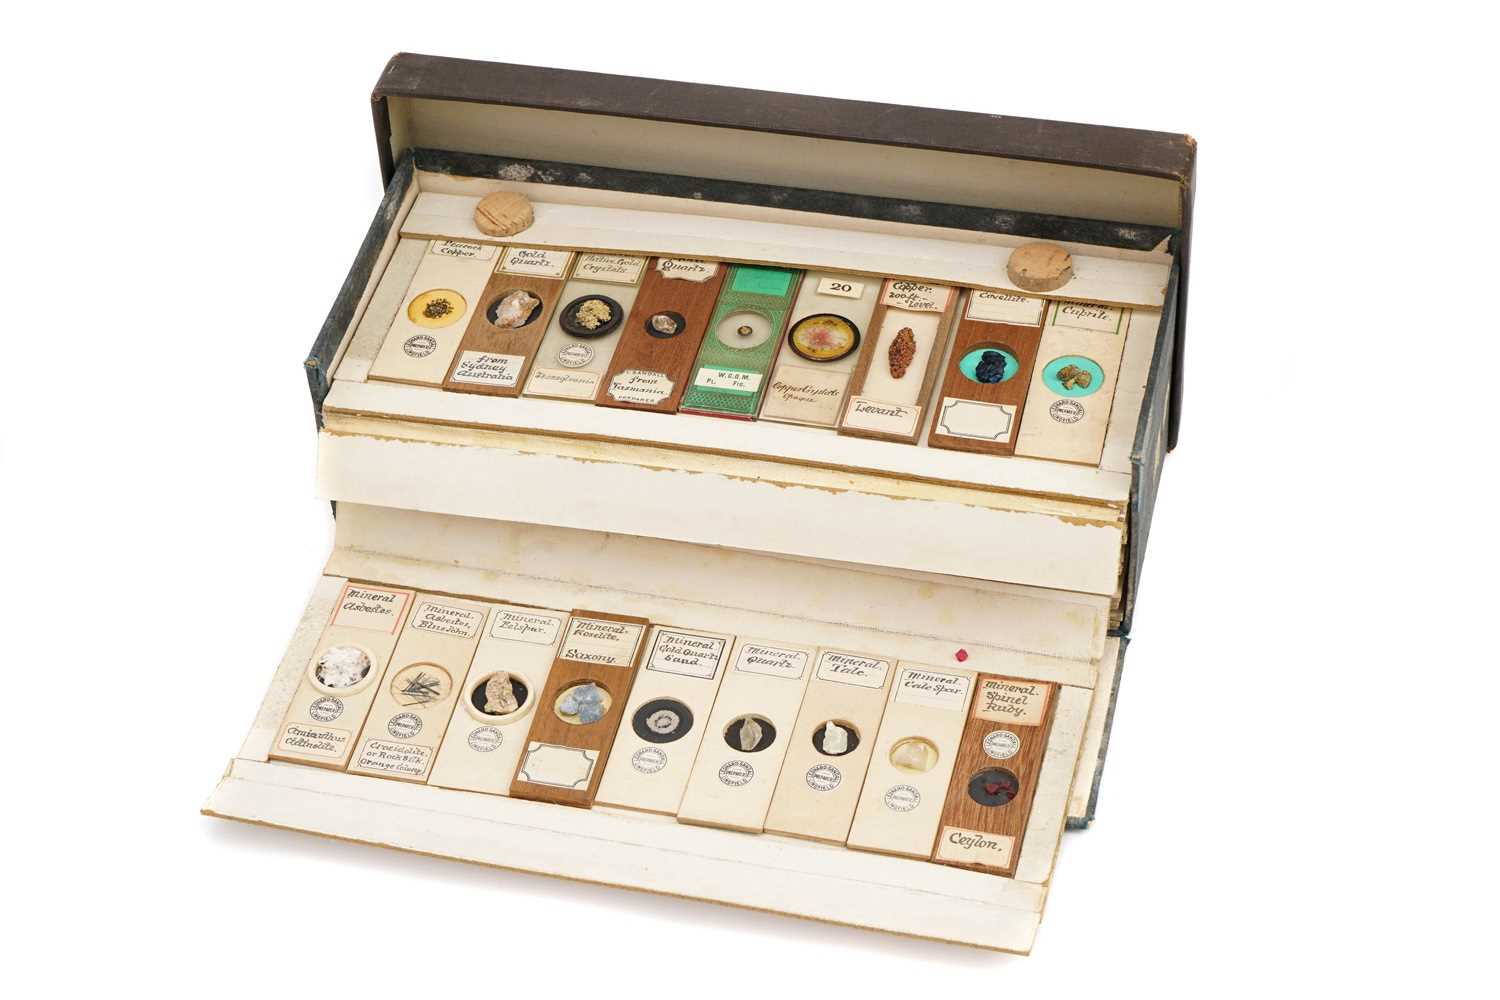 Lot 12 - A Very Fine Collection of Dry Mounted Crystal & Geological Microscope Specimen Slides